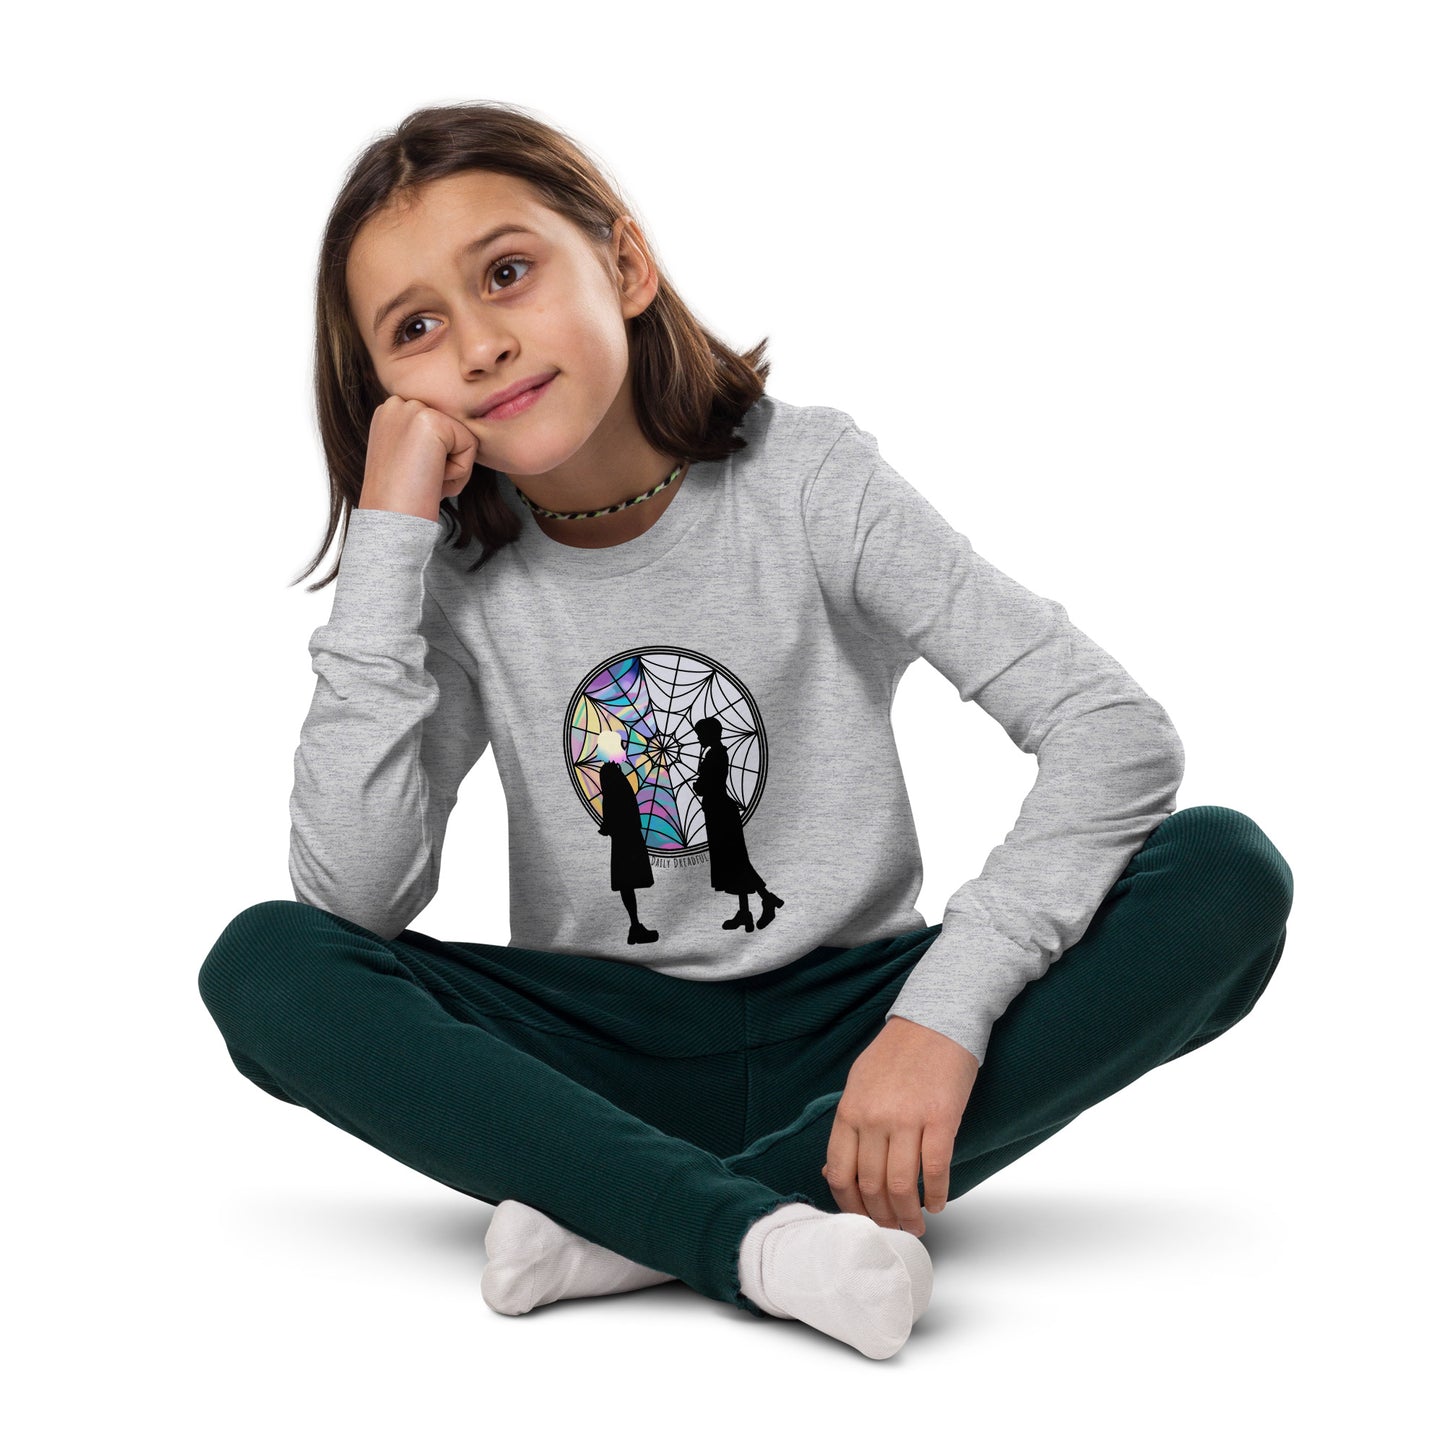 "Wednesday Addams and Enid Youth" long sleeve tee from Daily Dreadful